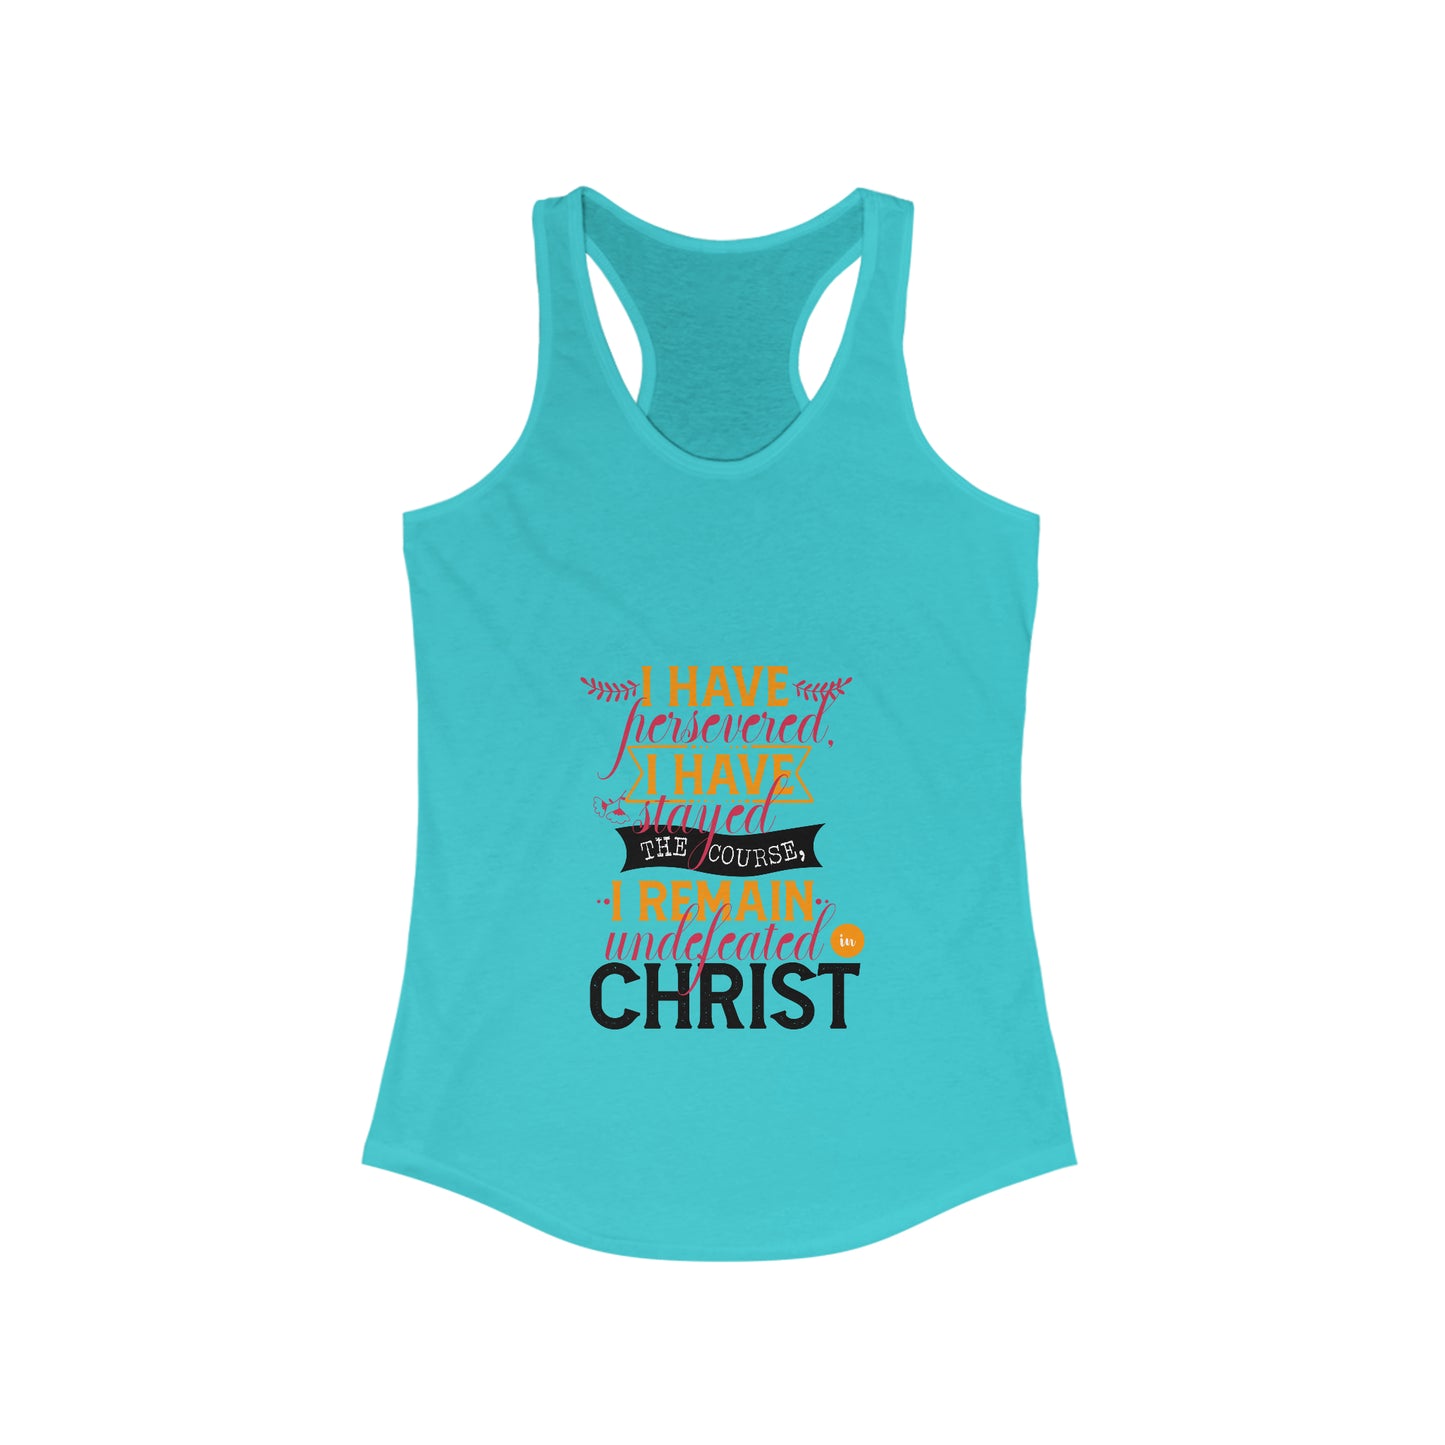 I Have Persevered I Have Stayed The Course I Remain Undefeated In Christ Slim Fit Tank-top